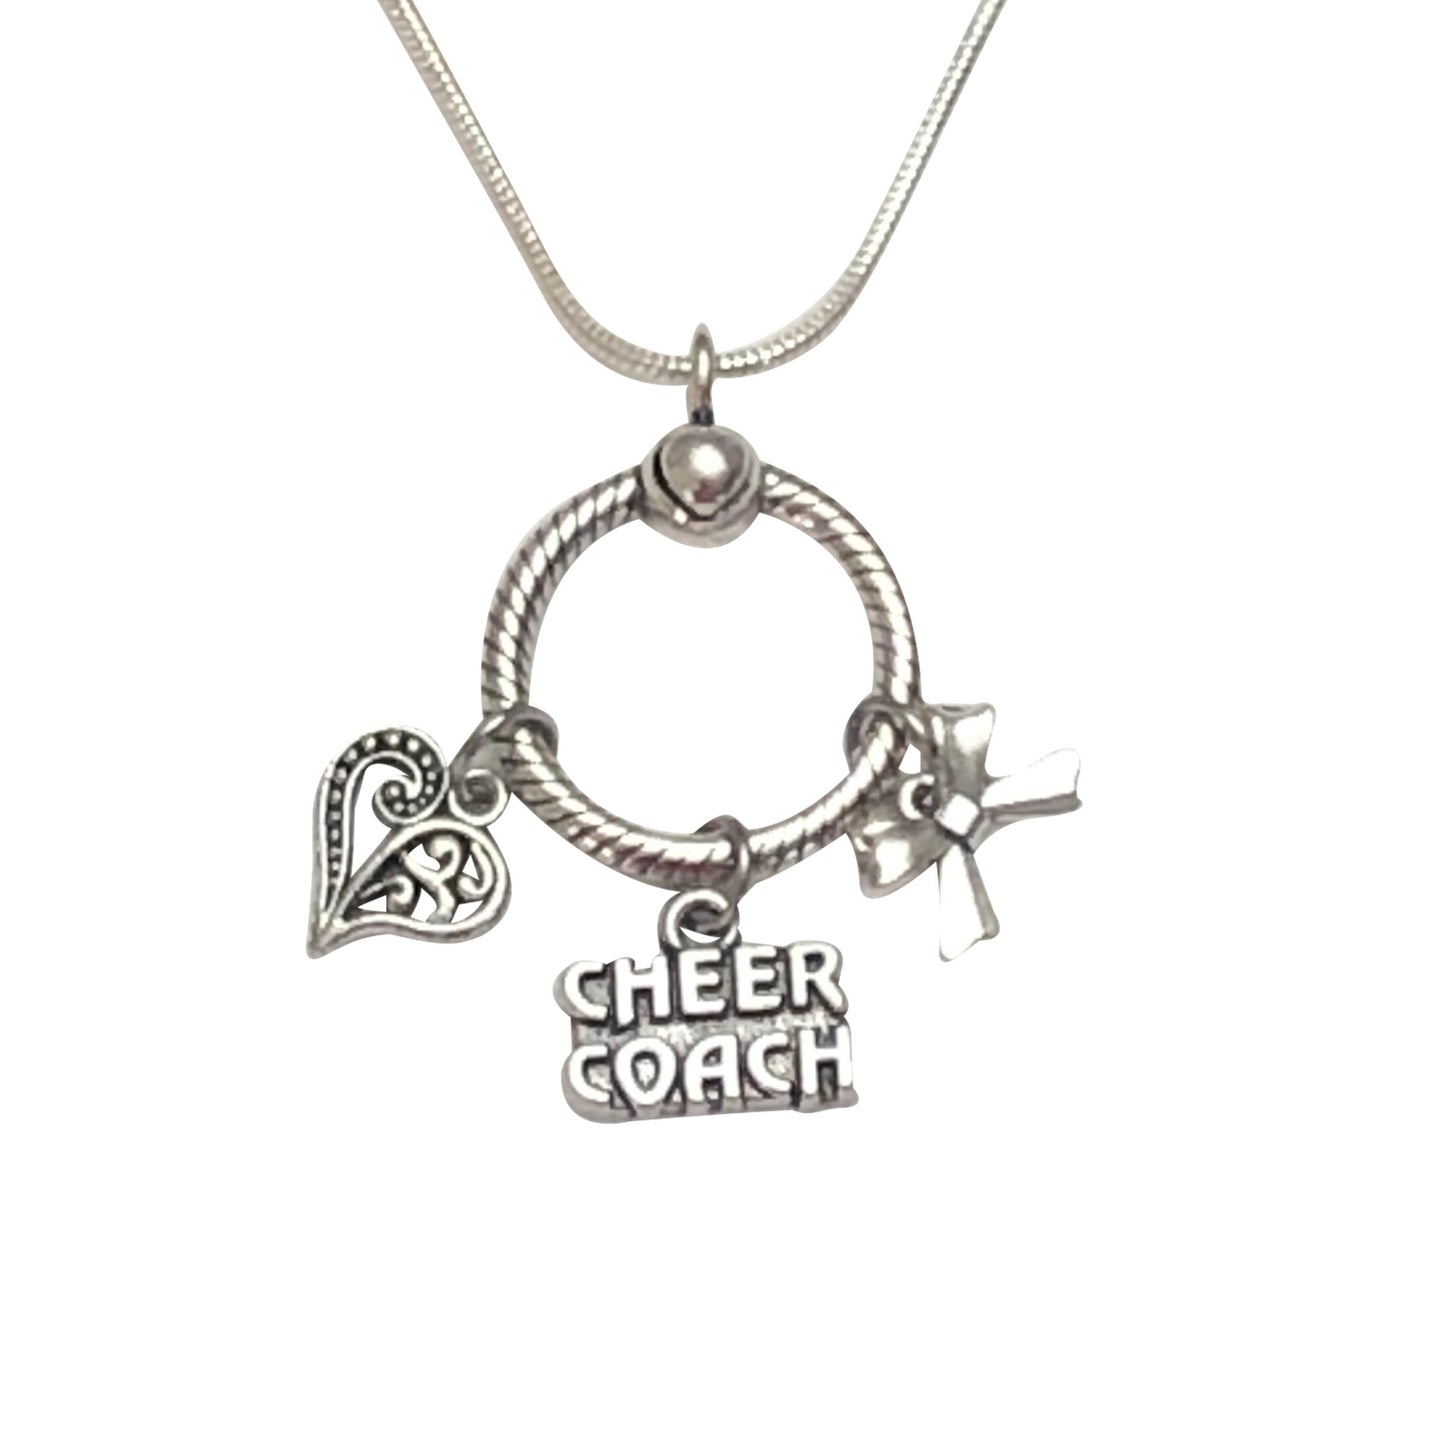 70 Pcs Cheerleader Charms Pendants Gymnastics Charm for Crafting Cheer and  School Sports Spirit Antique Silver Cheerleader Girl Dance Jumping Jewelry